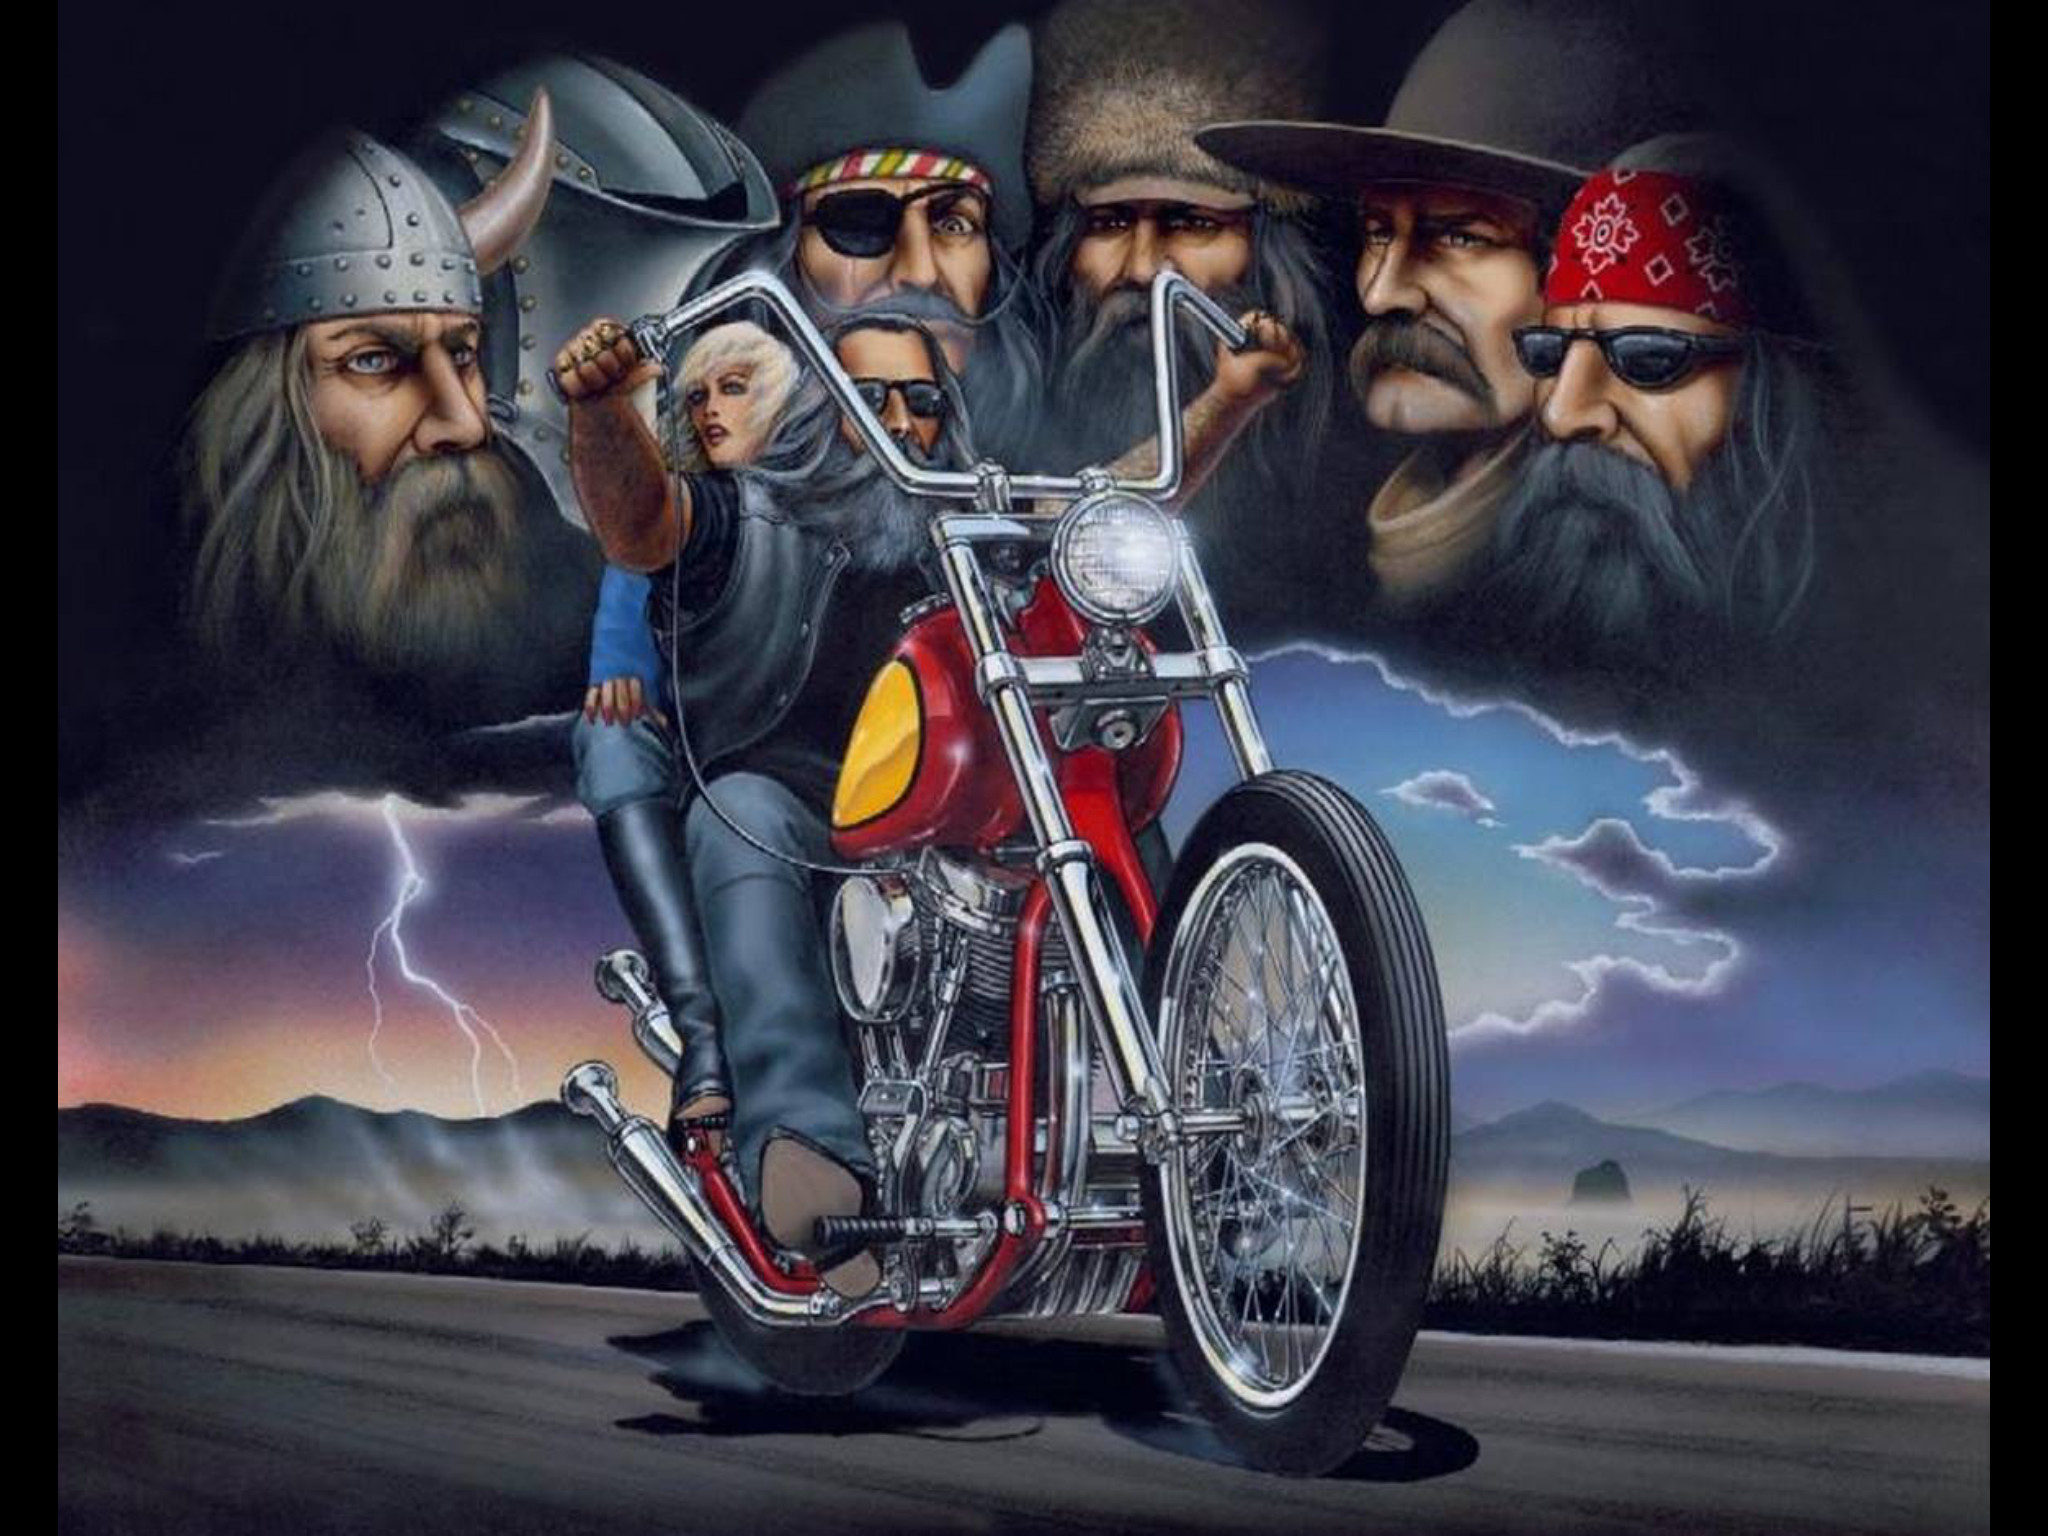 2048x1536 "Bikers" have been around a long time - Years of Biking" by David Mann